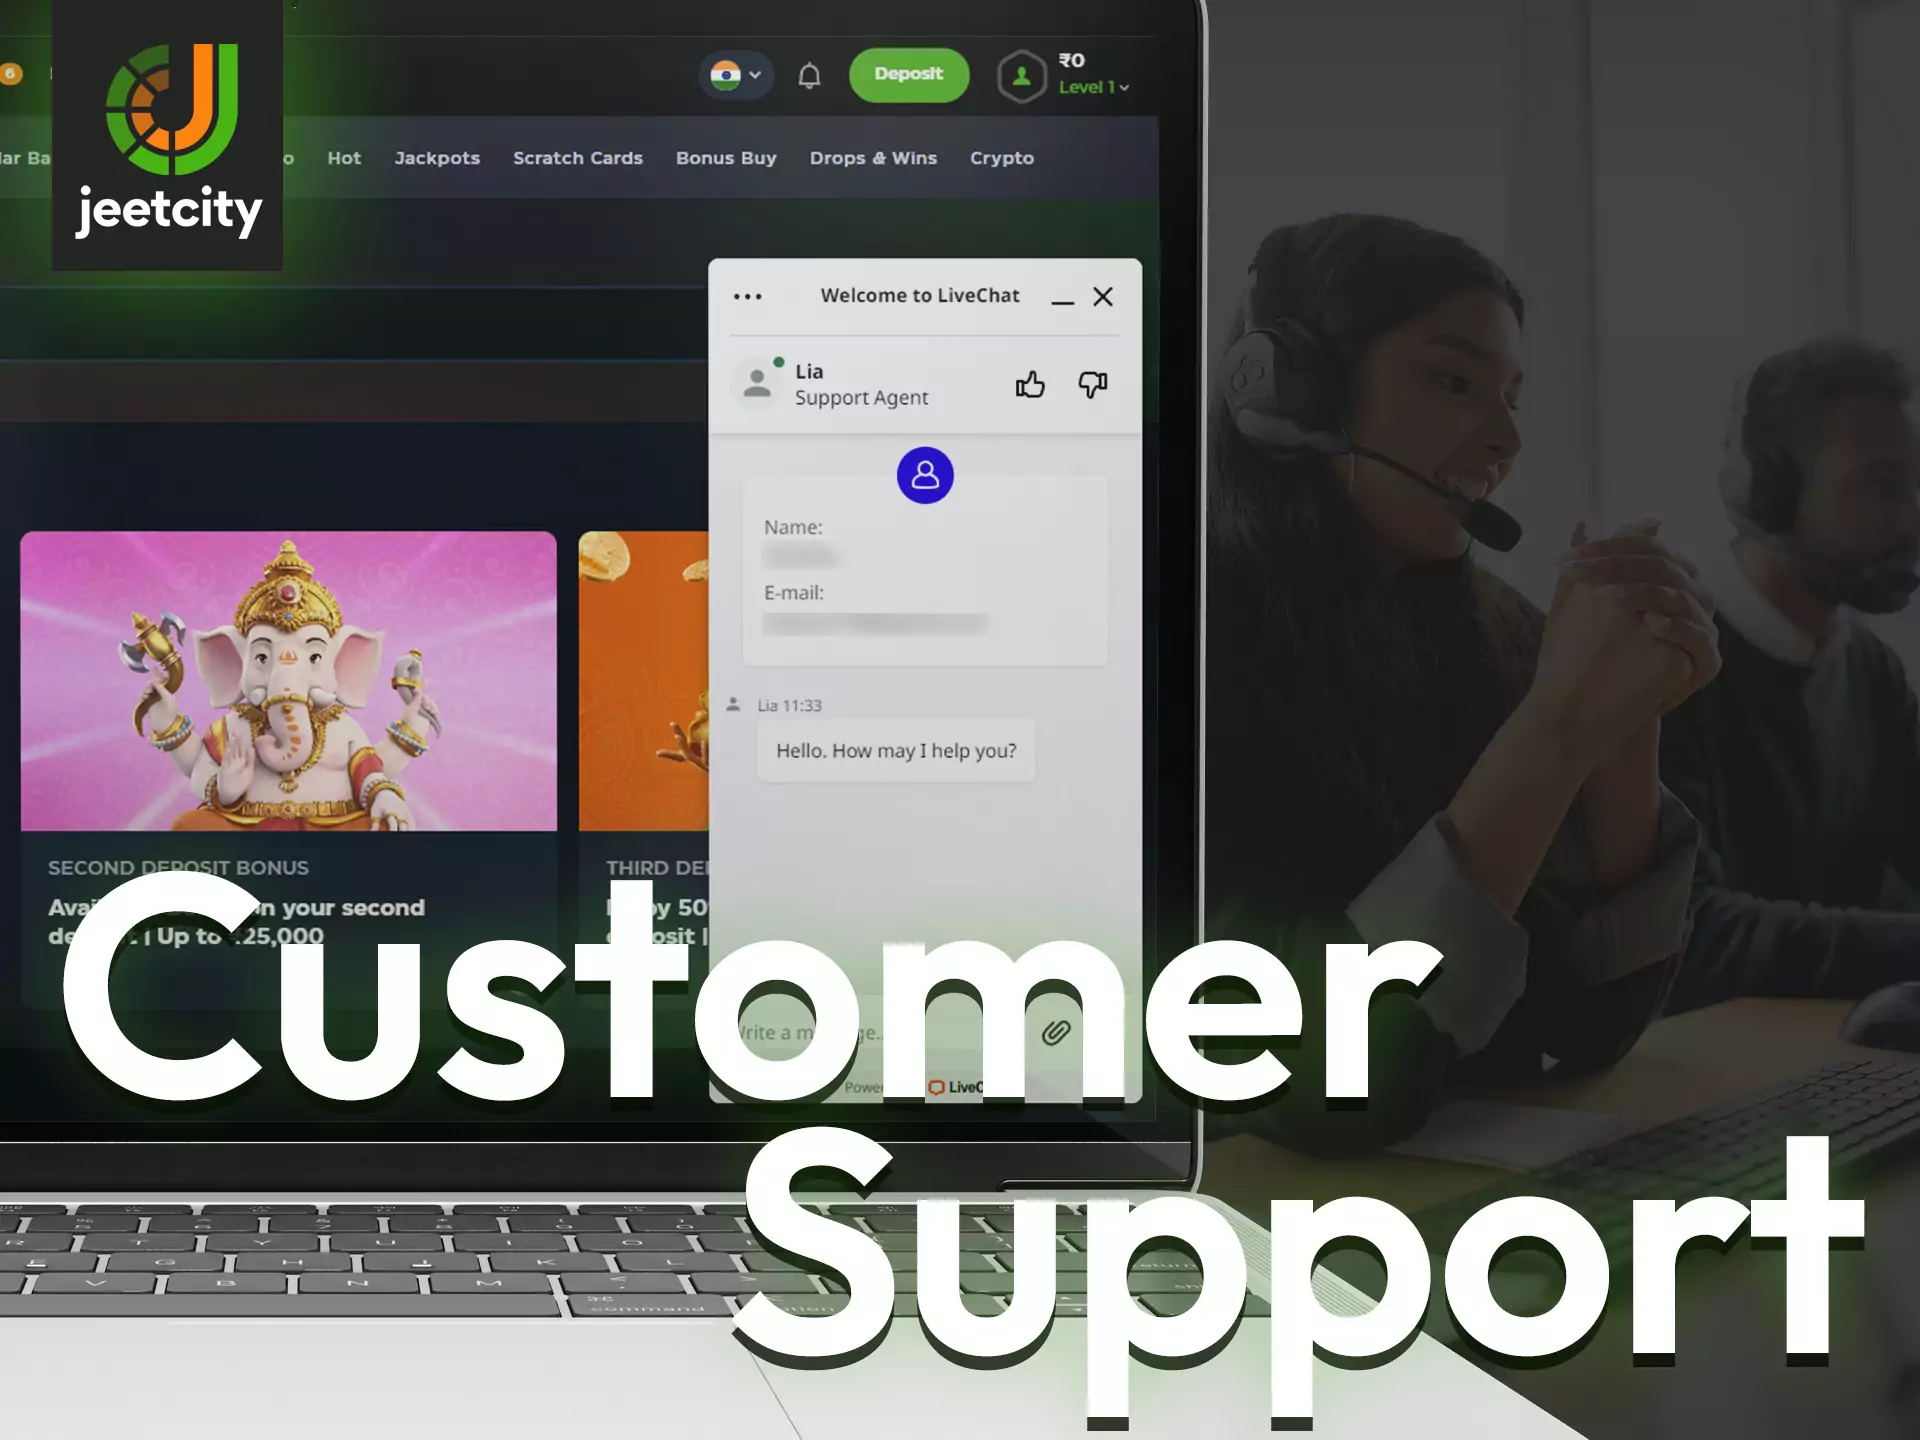 JeetCity support is always ready to help users.